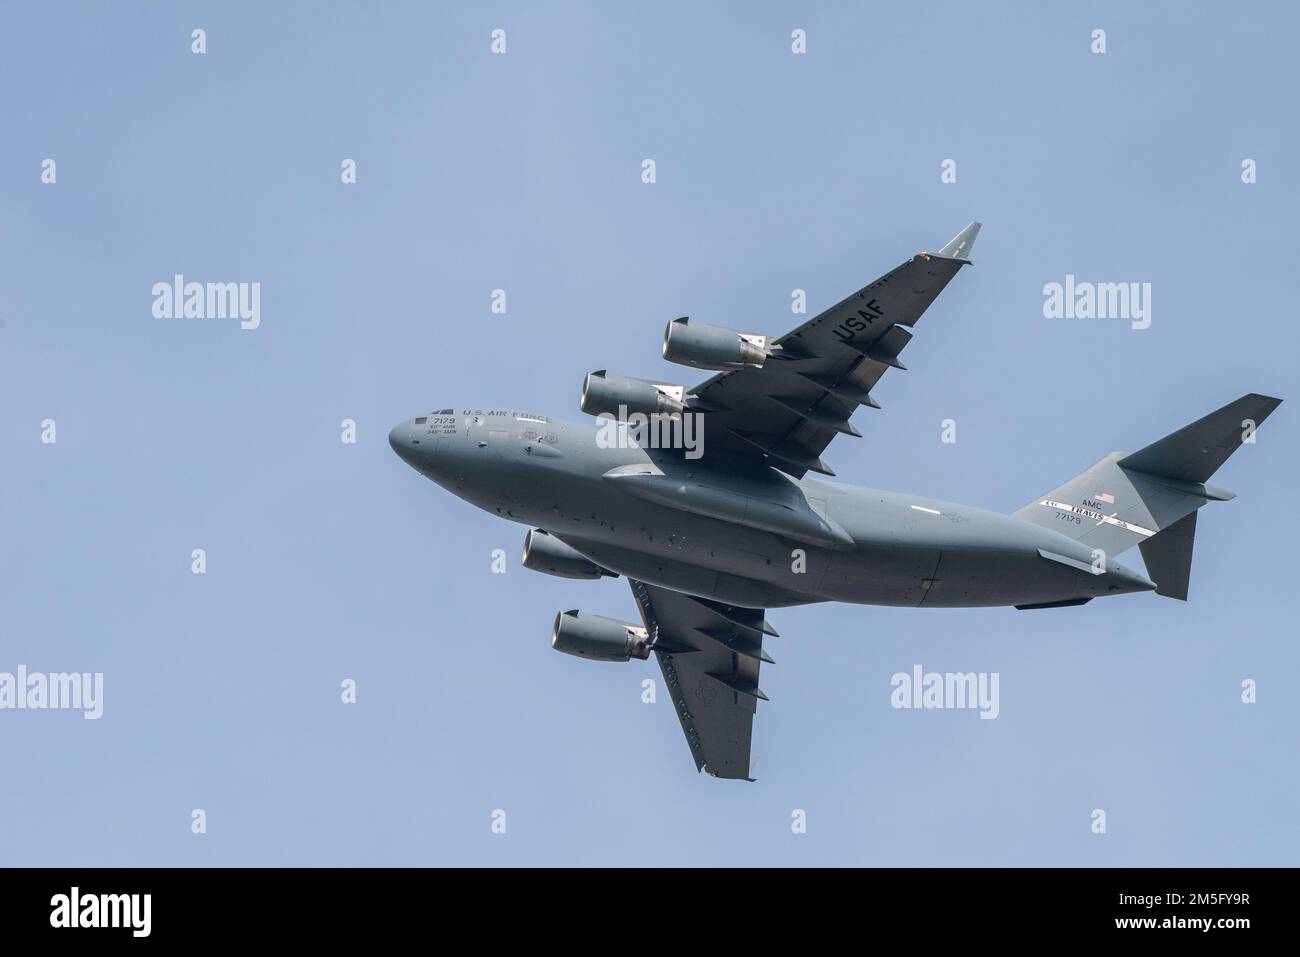 A U.S. Air Force C-17 Globemaster III conducts flight operations at Travis Air Force Base, California, March 15, 2022. This military airlift aircraft is a high-wing, four-engine, T-tailed military transport vehicle capable of carrying payloads up to 169,000 pounds. It has an international range and the ability to land on small airfields. A fully integrated electronic cockpit and advanced cargo system enables a crew of three to operate all systems on any type of mission. Stock Photo